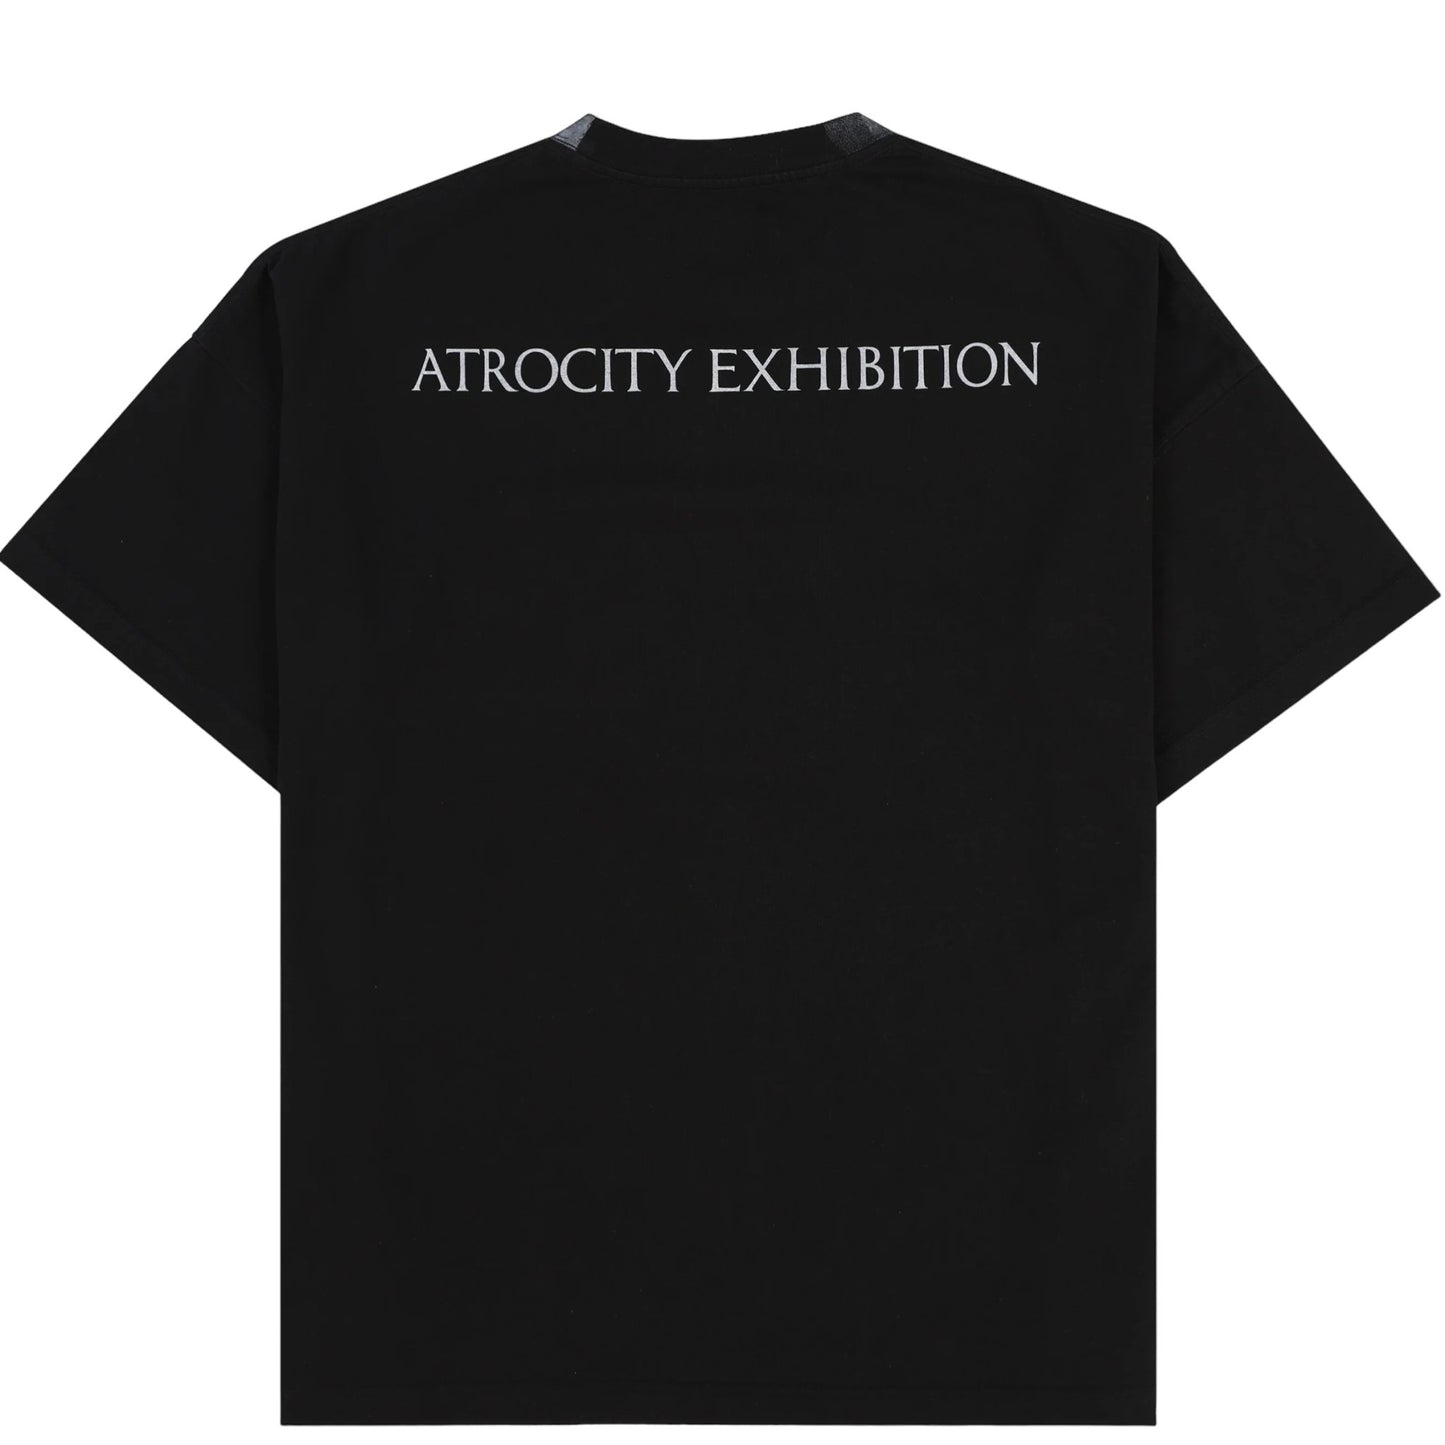 PLEASURES black cotton jersey t-shirt with the text "atrocity exhibition" printed on the back in white oversized plastisol letters.